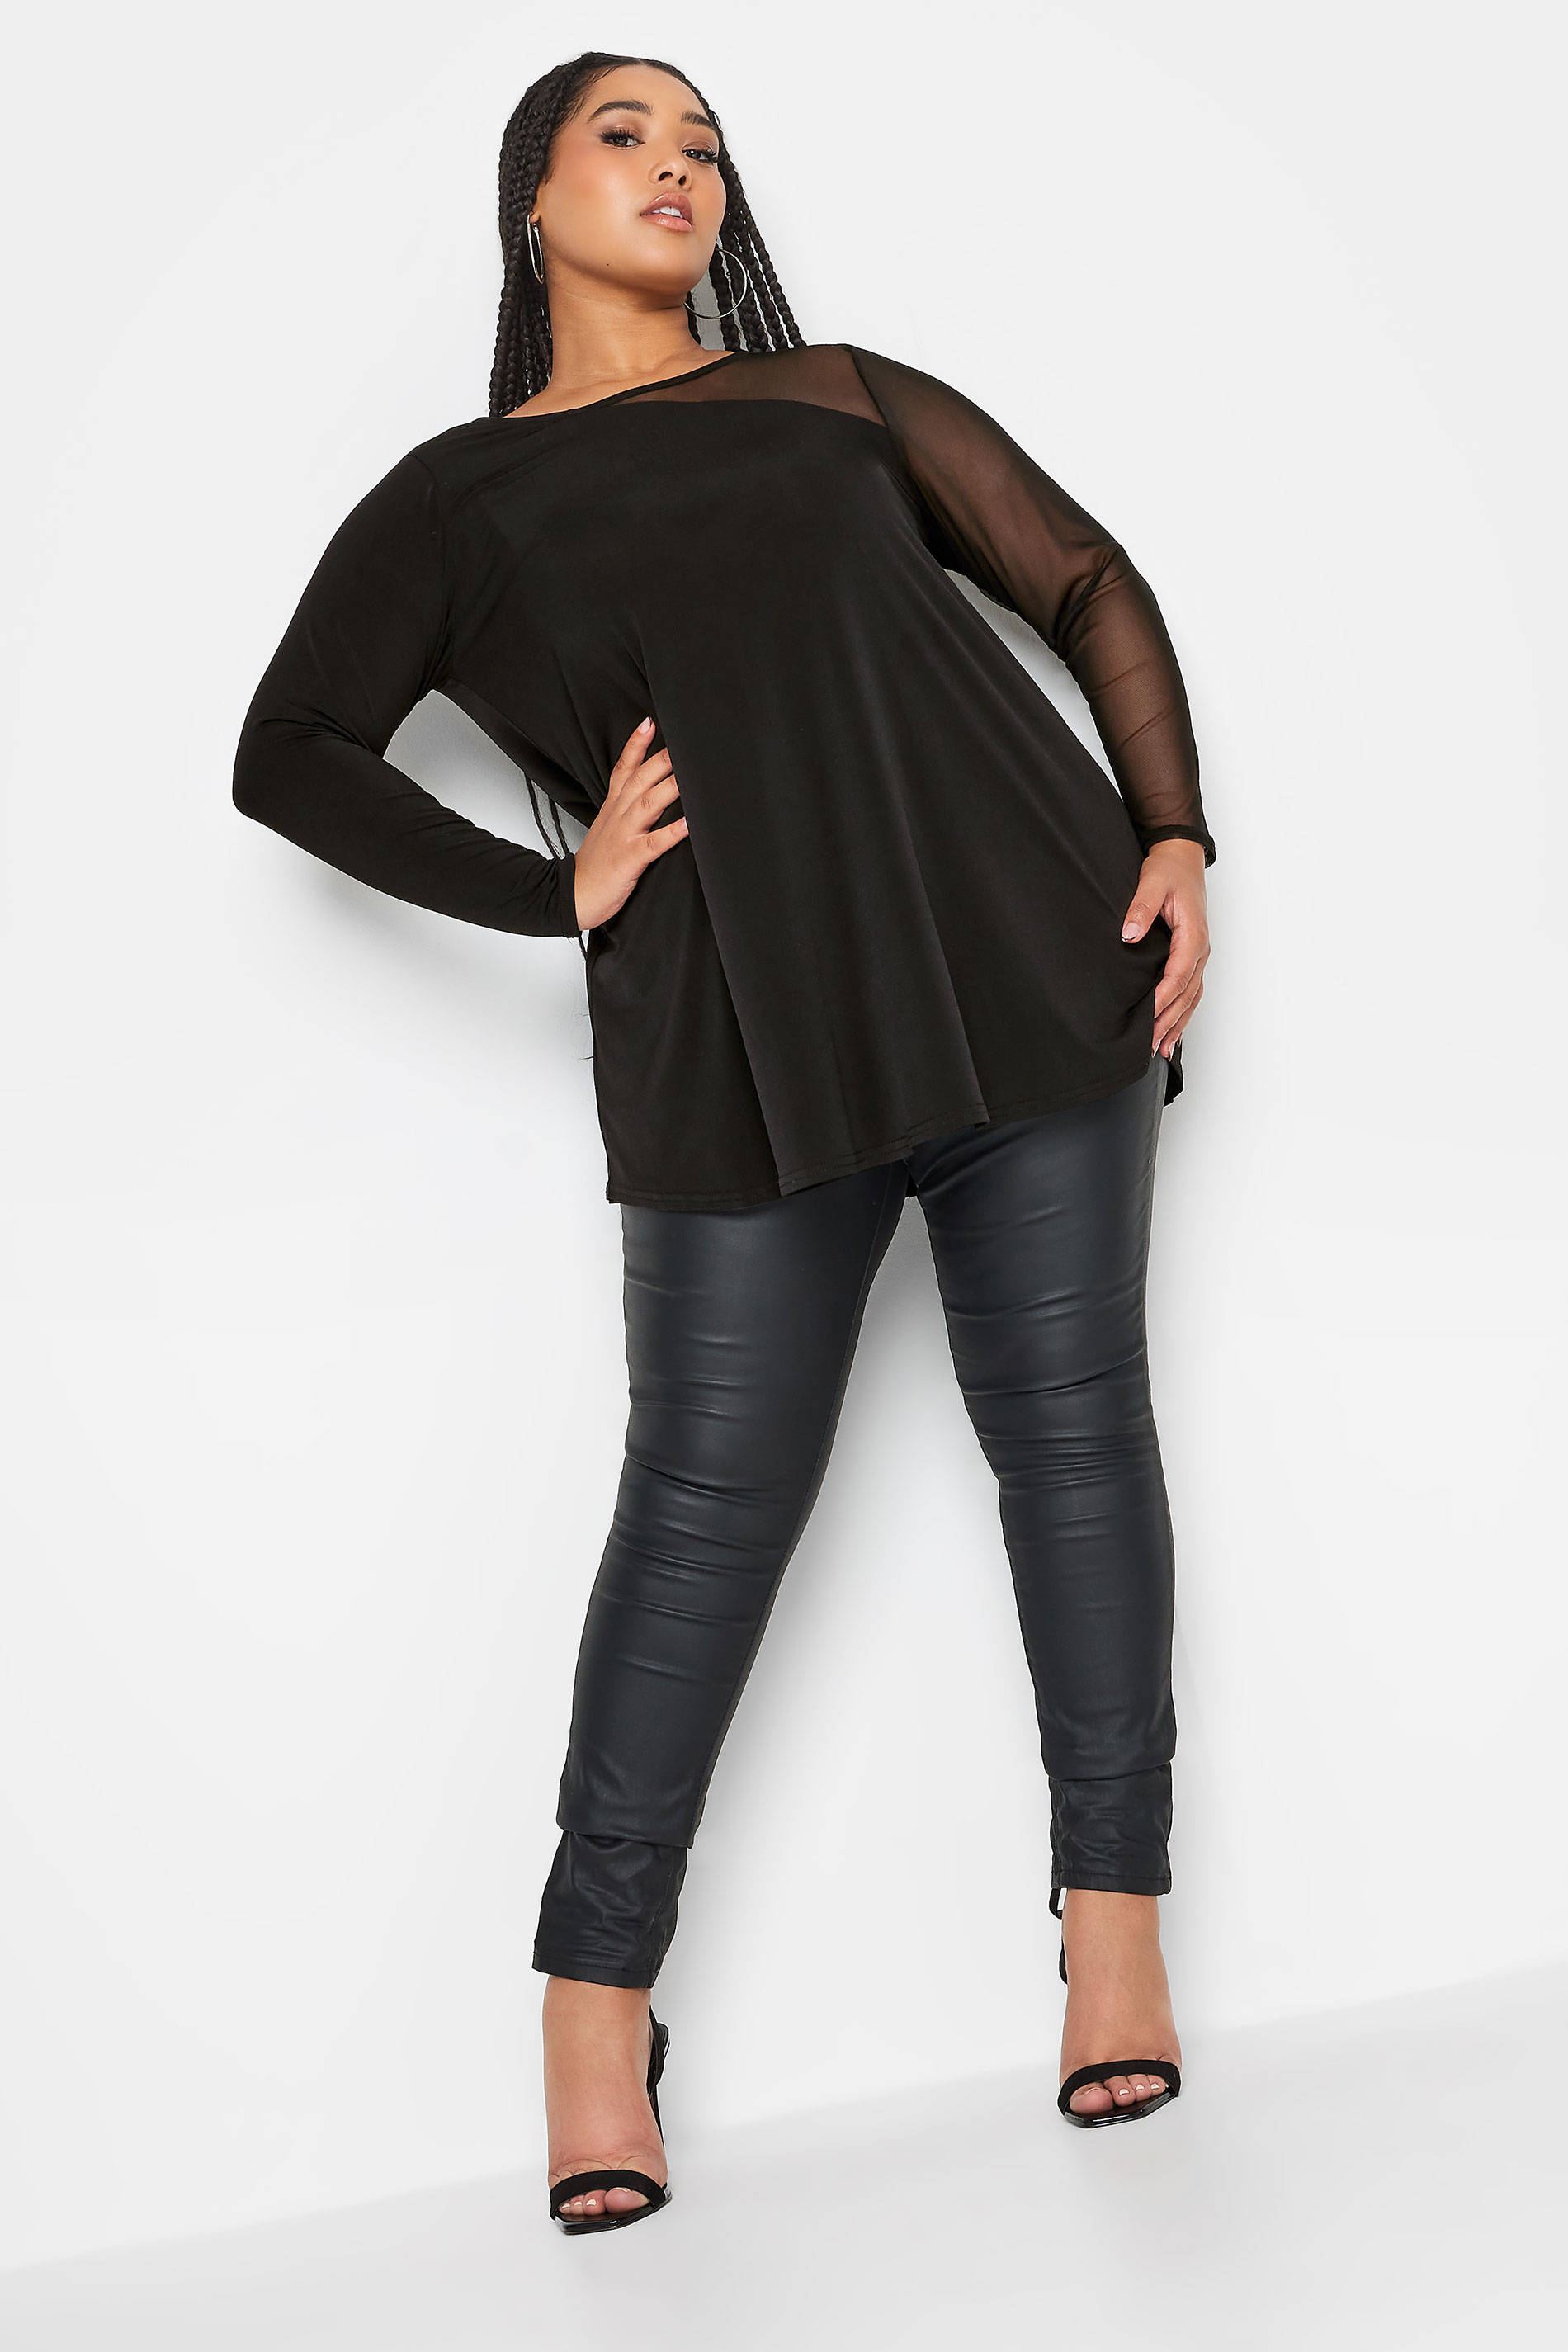 LIMITED COLLECTION Plus Size Black Half Mesh Sleeve Swing Top | Yours Clothing 3